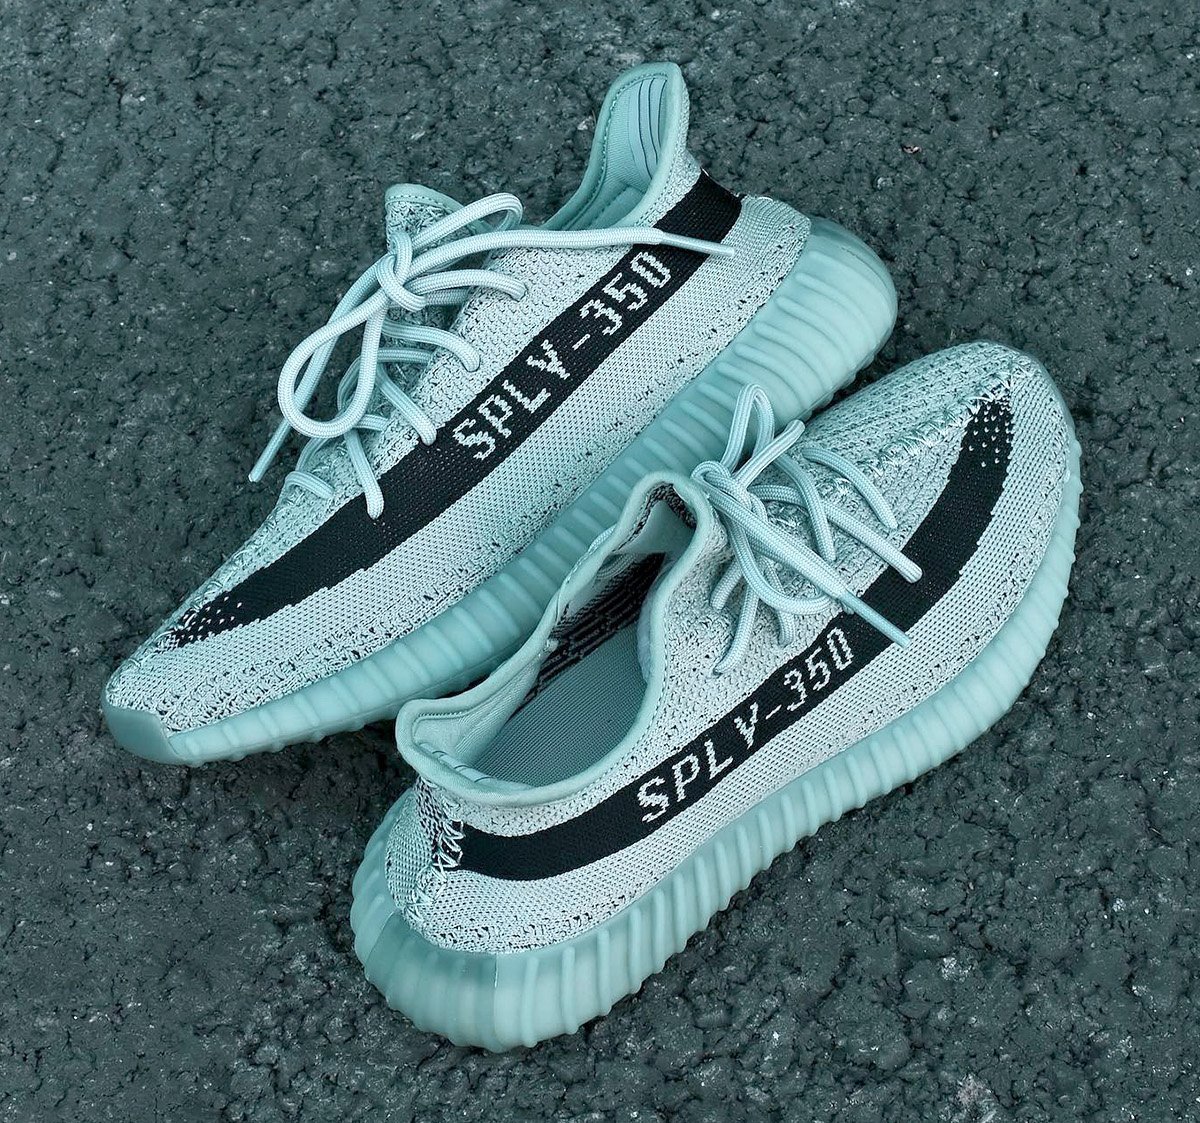 First Look At Adidas Yeezy Boost 350 V2 "Jade Ash" Sneaker